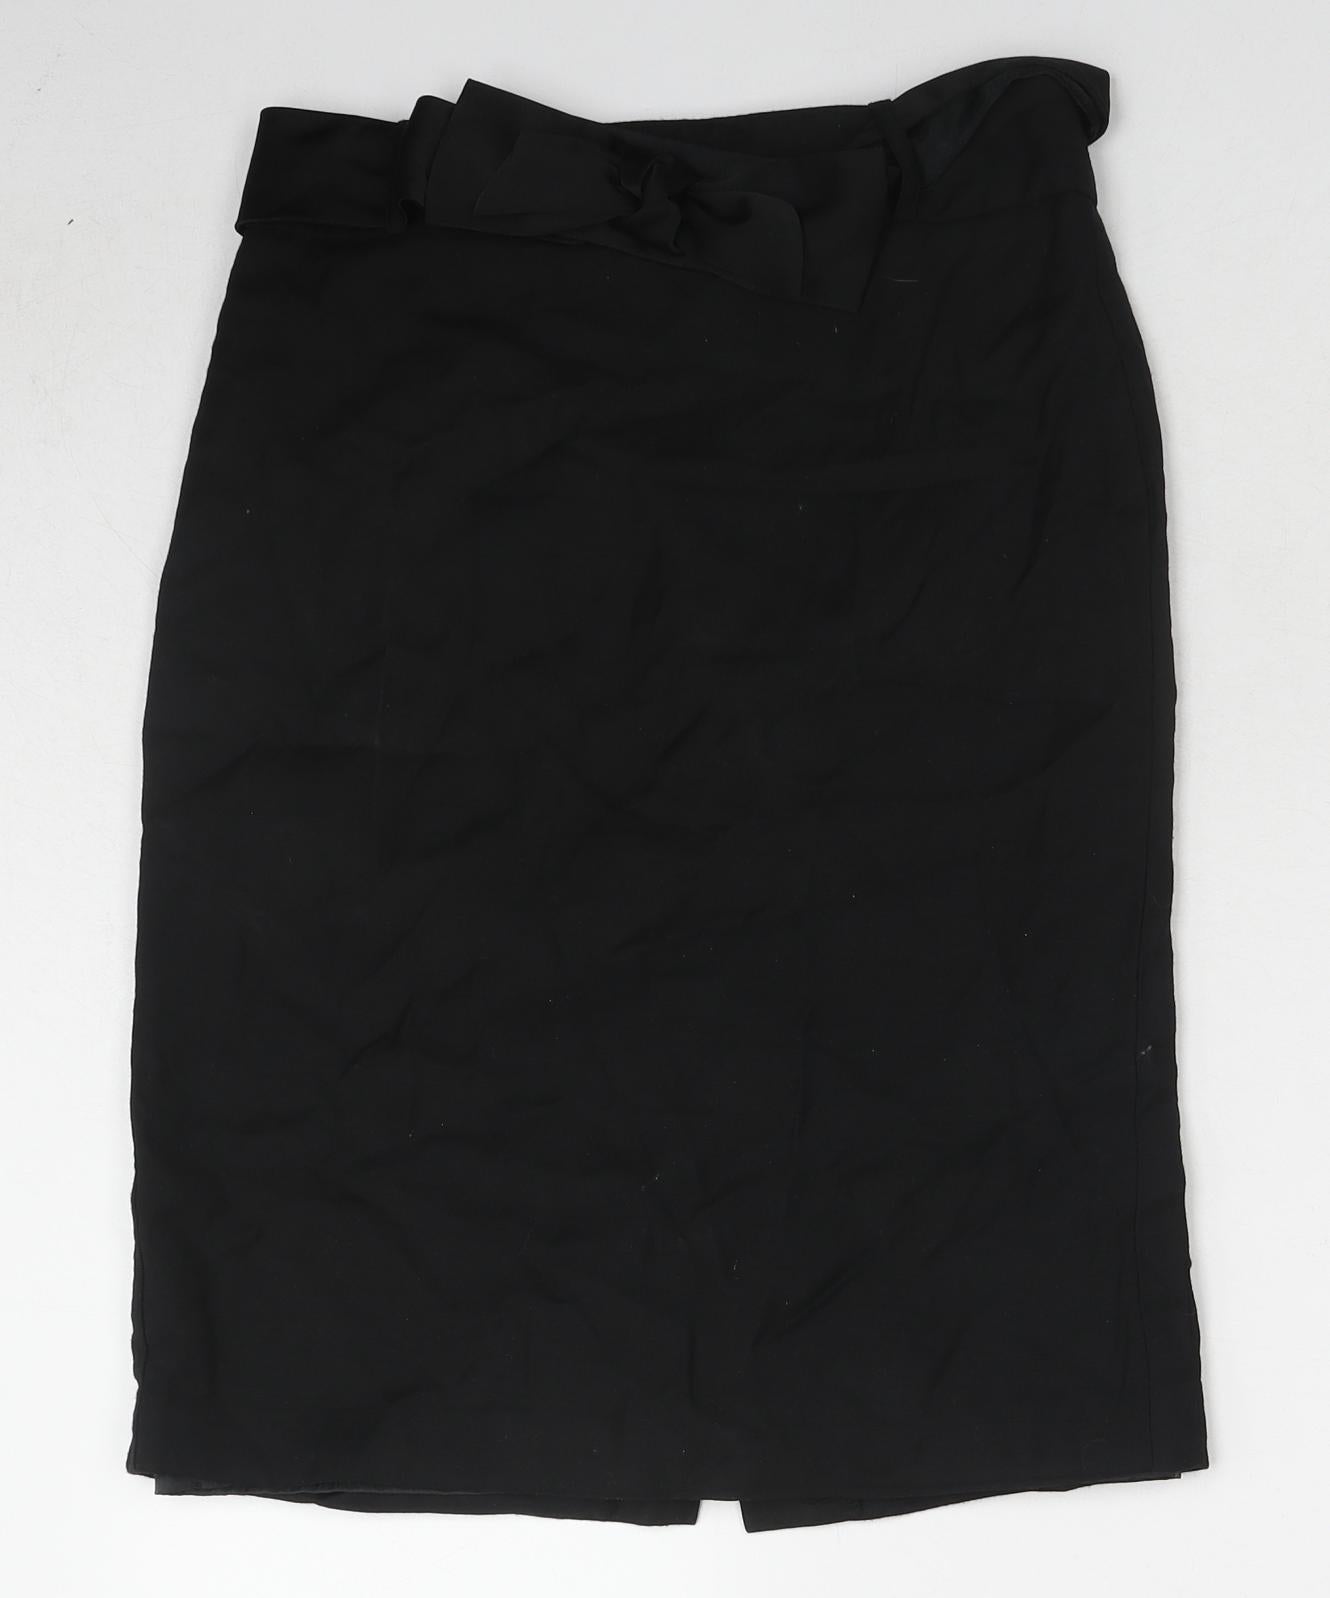 Monsoon Womens Black Polyester A-Line Skirt Size 8 Zip - Belt included